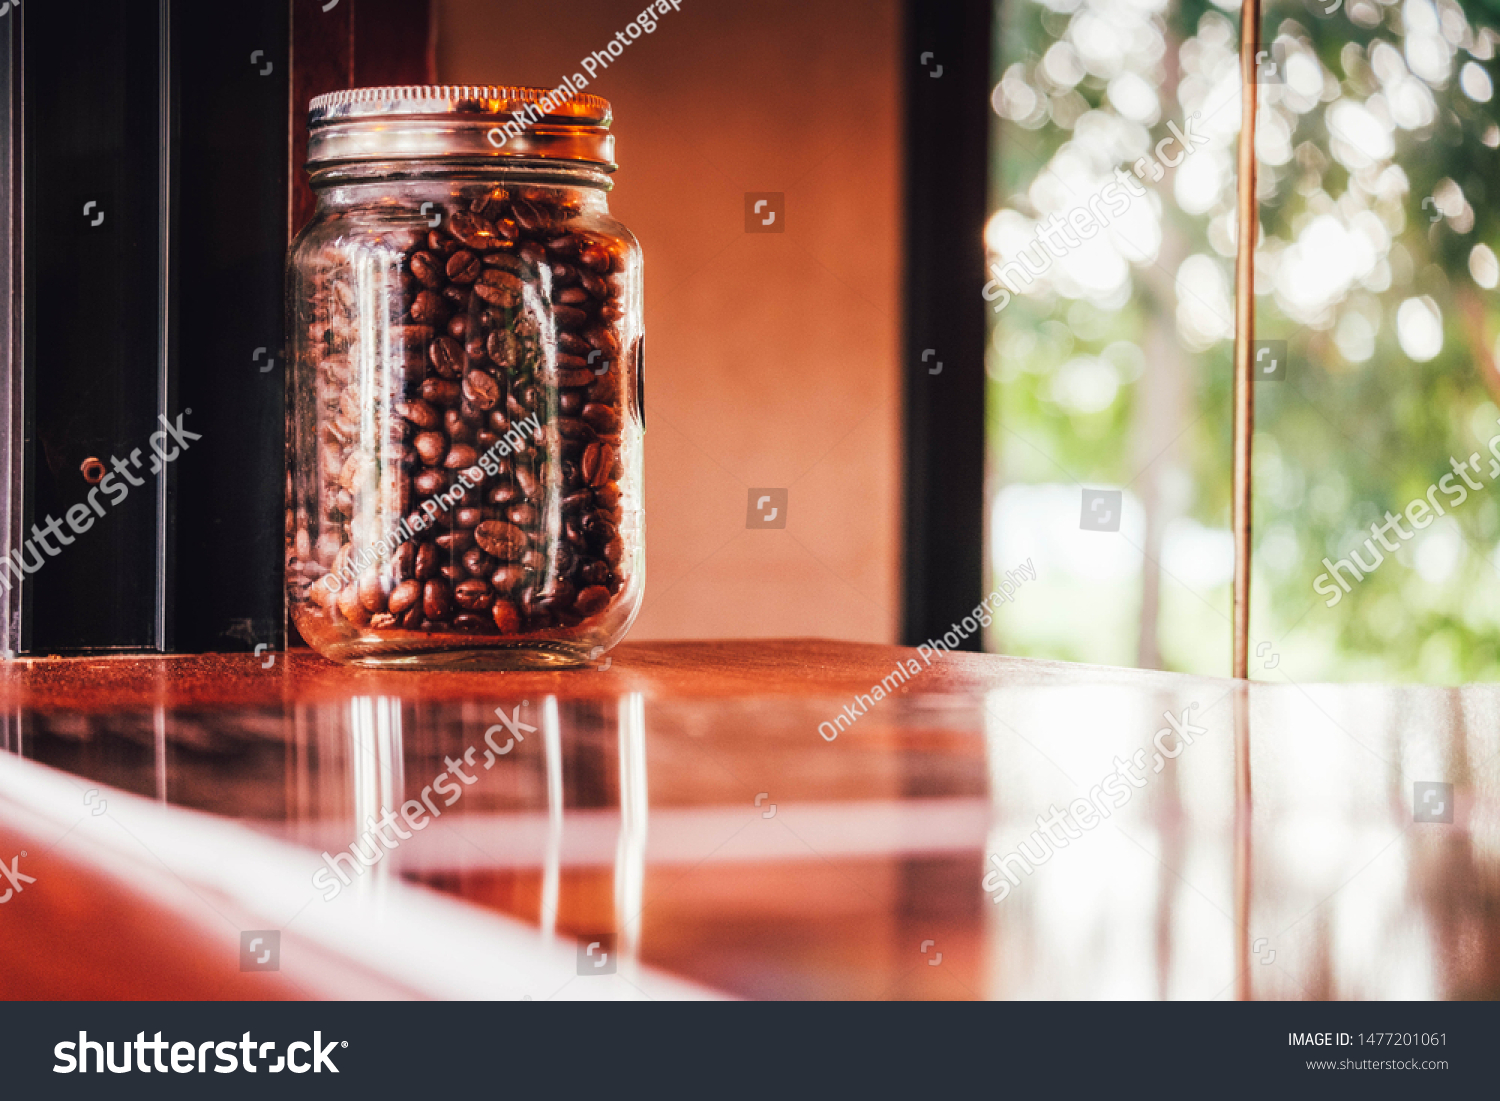 Download Coffee Beans Packed Glass Jar Placed Stock Photo Edit Now 1477201061 PSD Mockup Templates